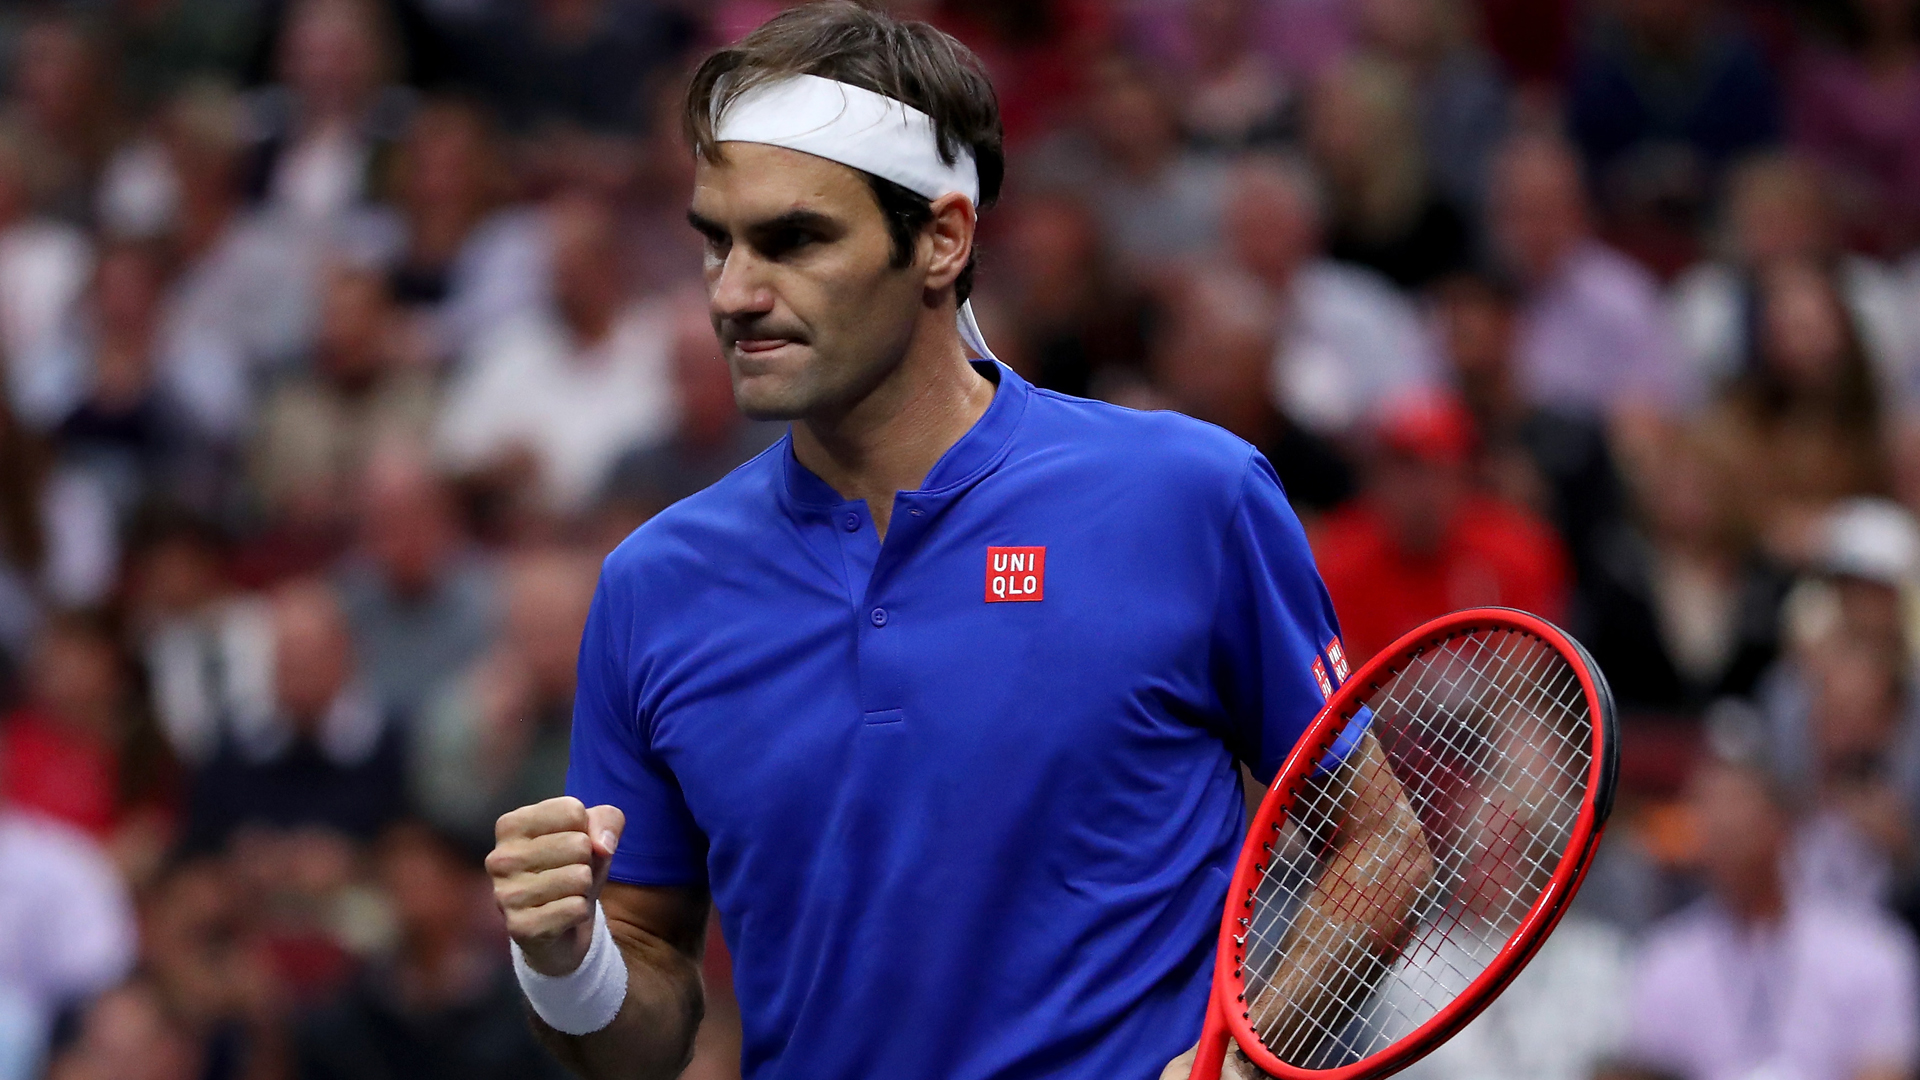 Federer shines as Europe hold narrow lead at Laver Cup